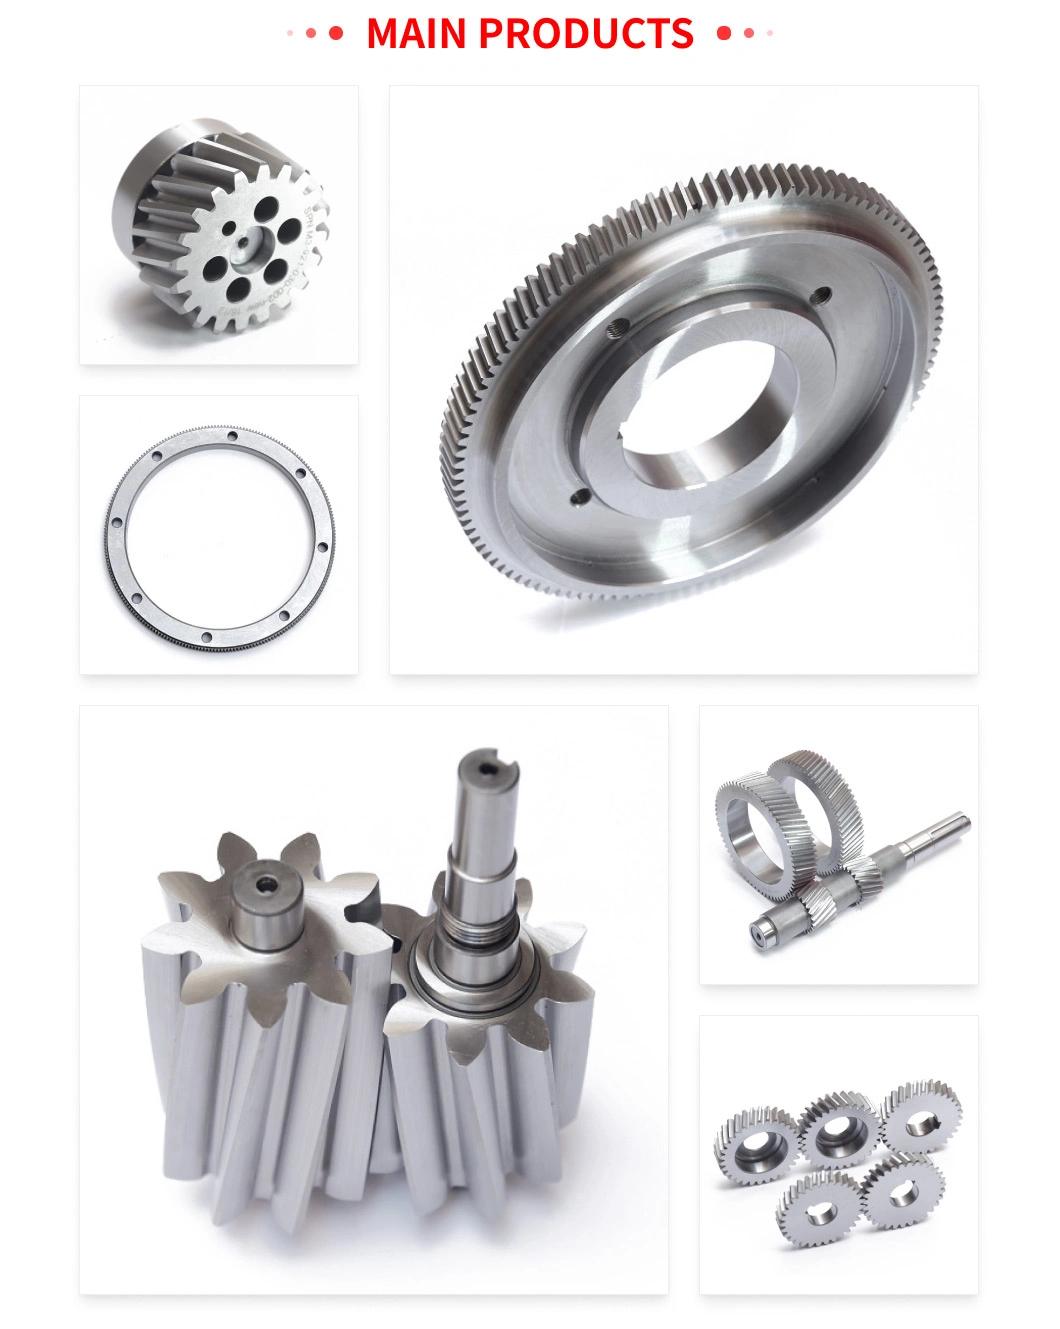 Non-Standard High Precision Transmission Gear Is Widely Used in Automobile, Machine Tools and Other Industries